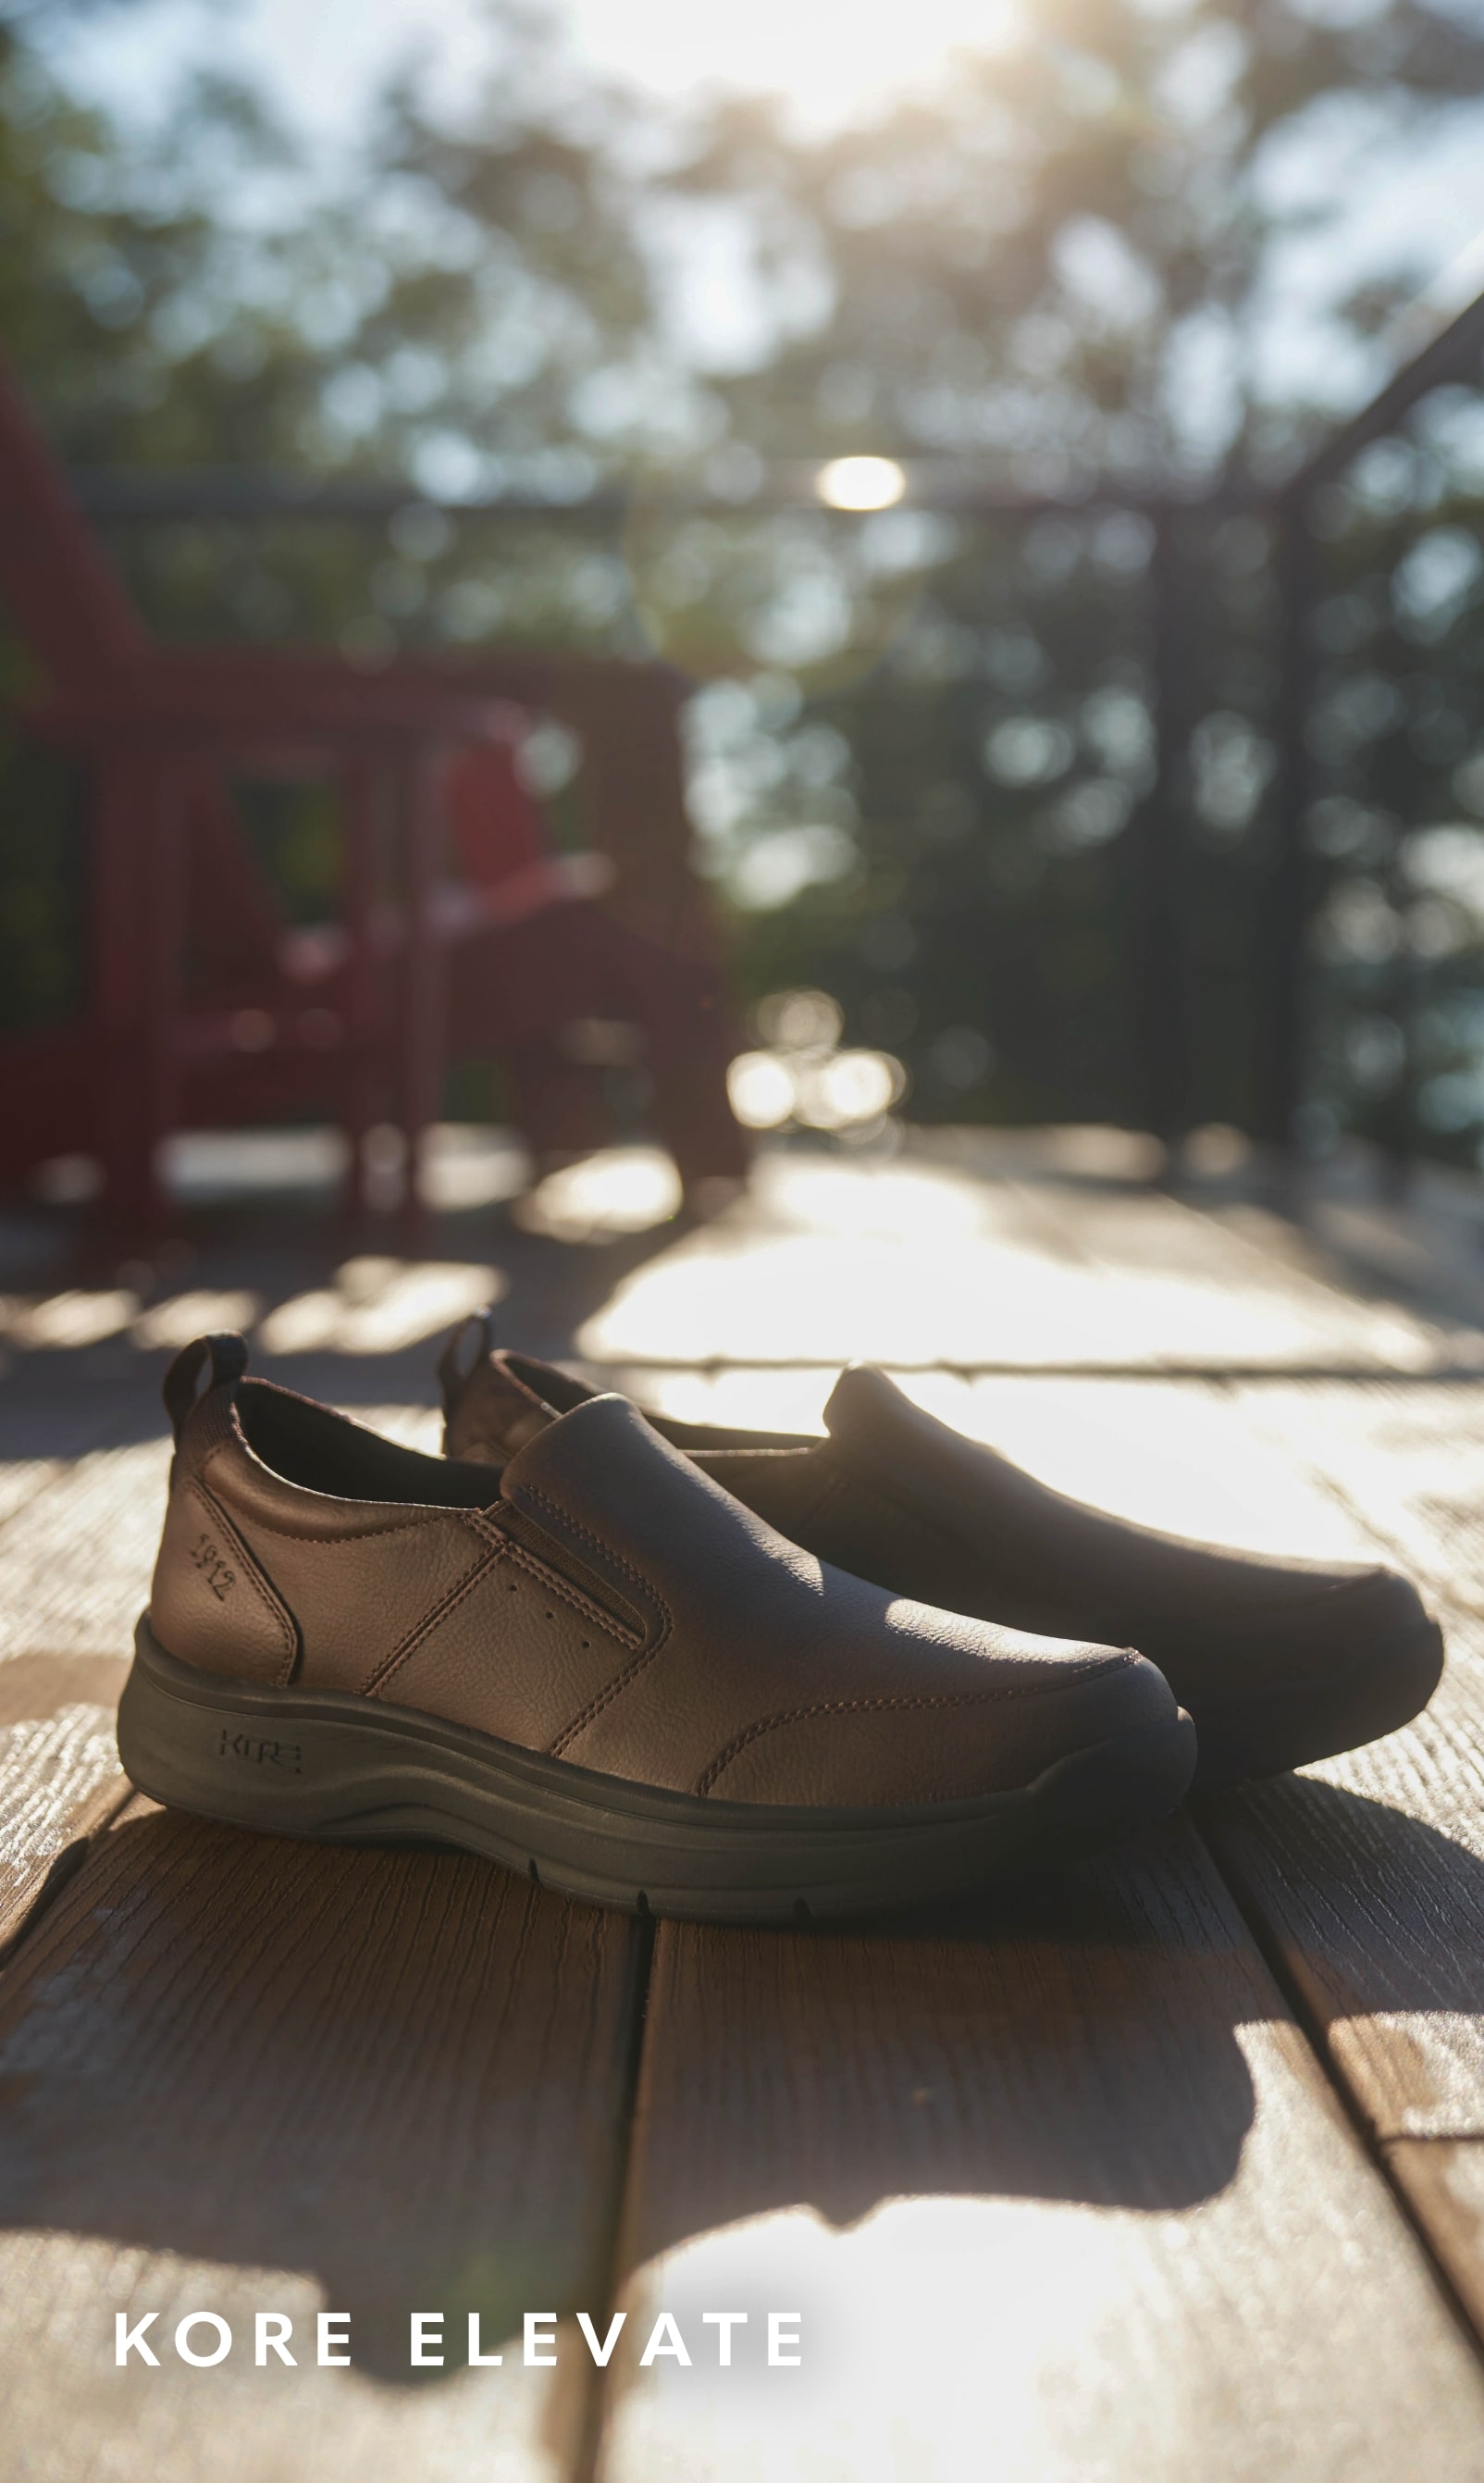 Comfort Styles Image features the Kore Elevate in brown.